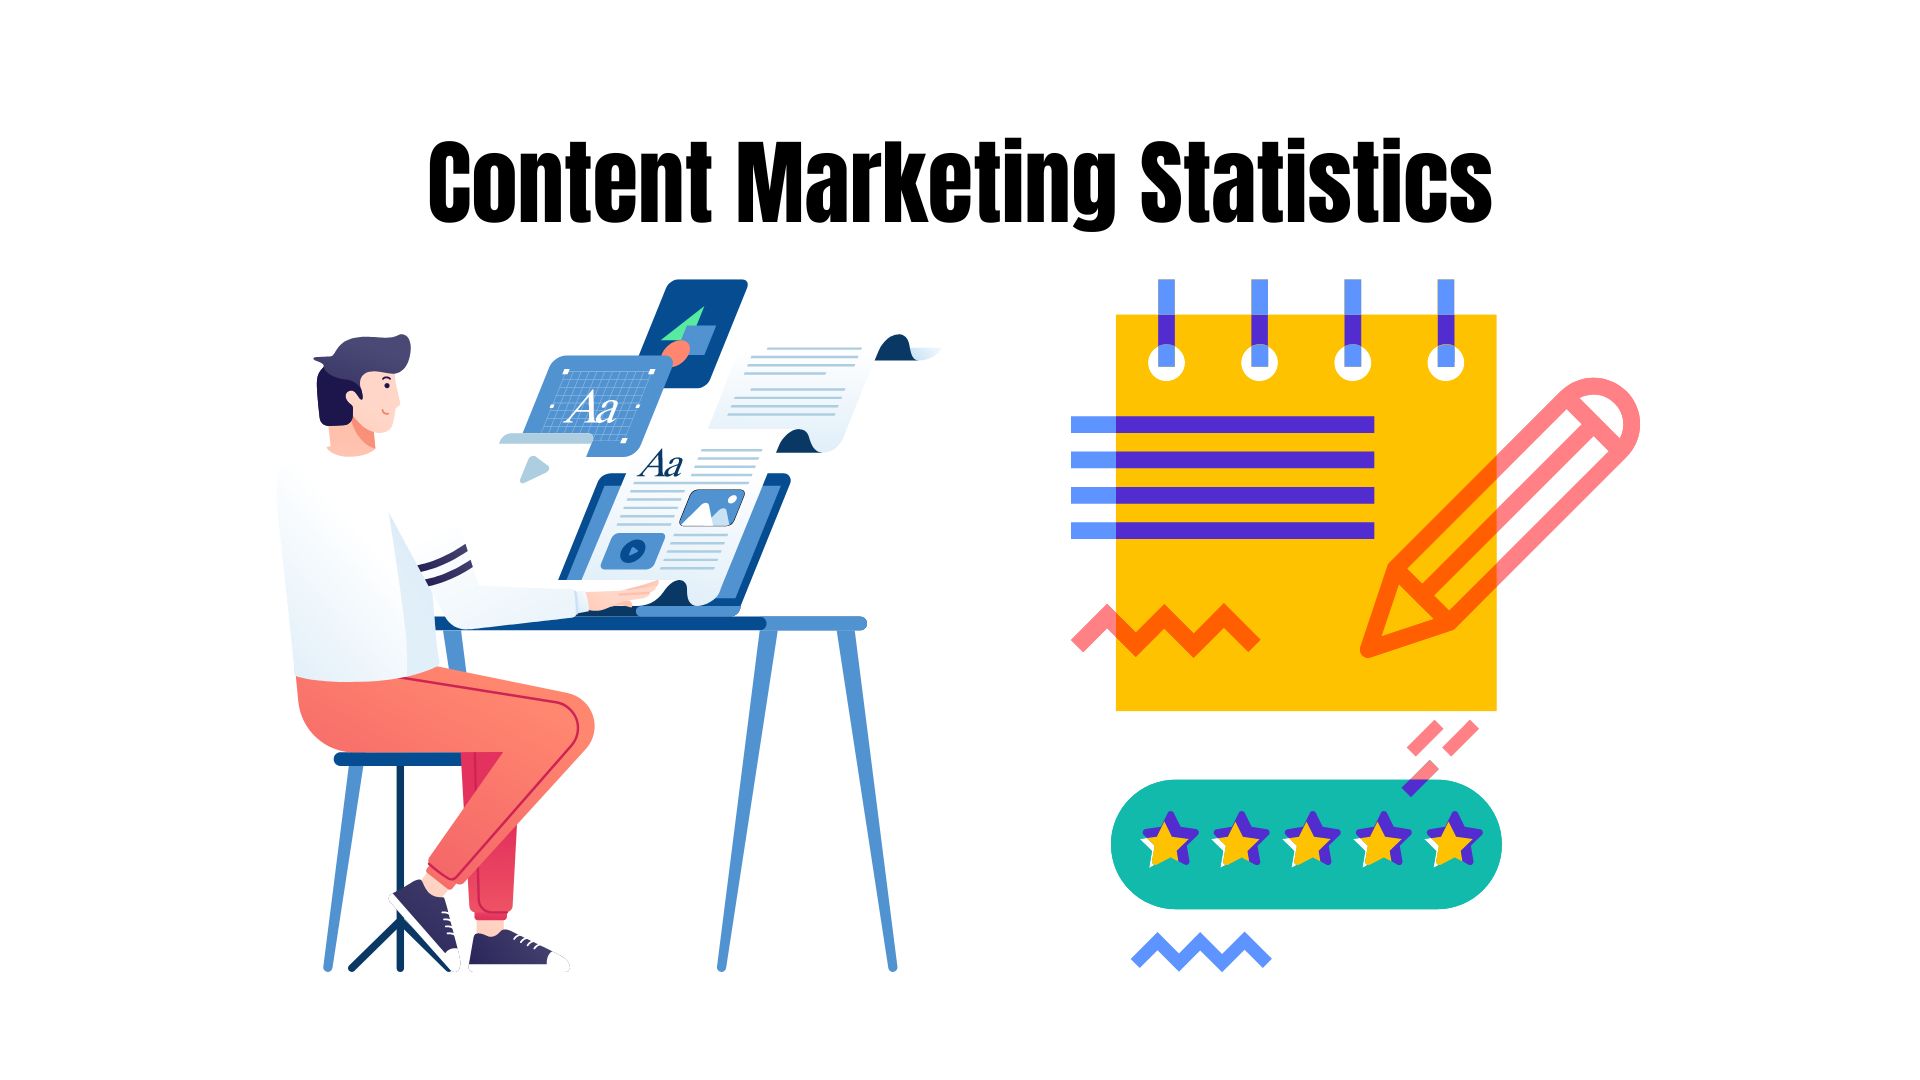 Content Marketing Statistics 2022 Trends, Facts, Market Size and Revenue